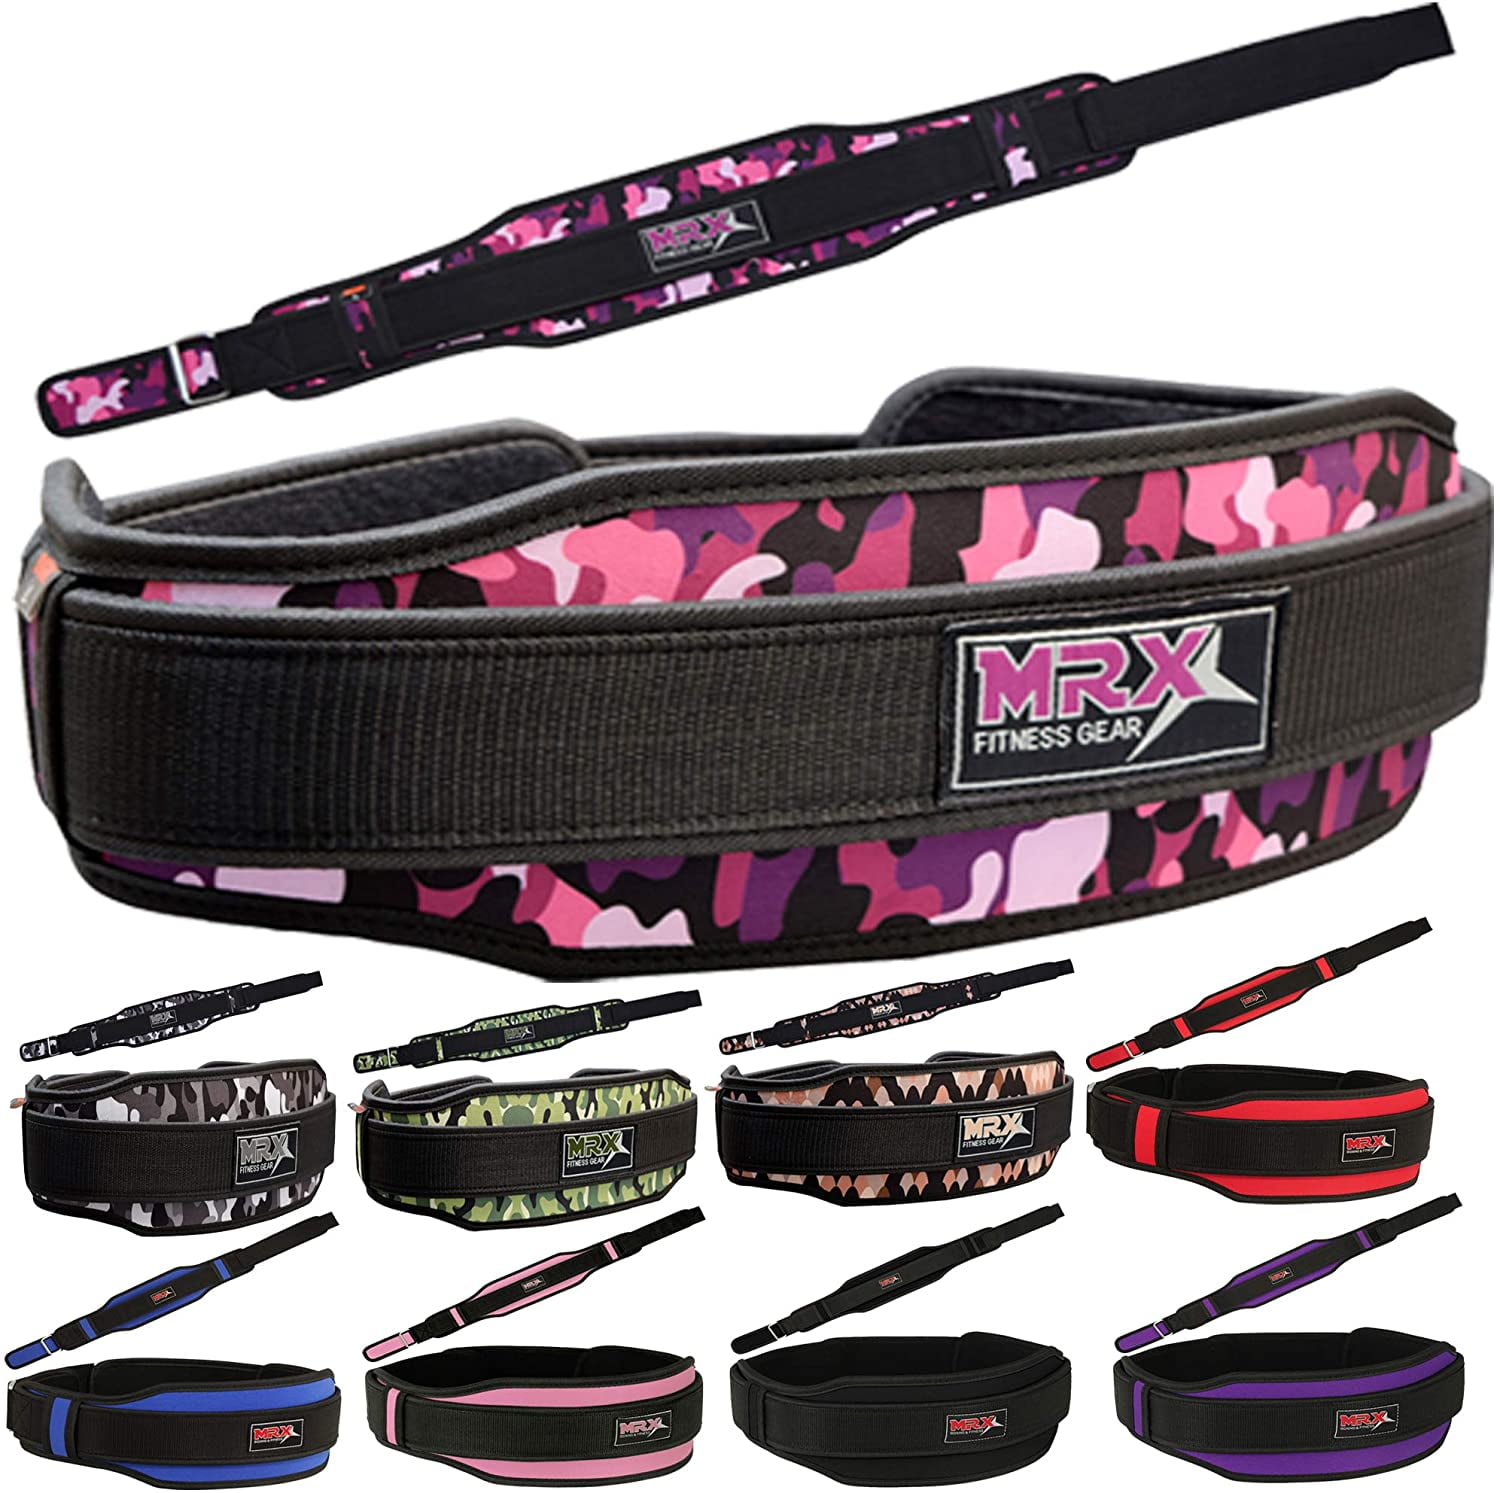 NEW Weight Lifting Belts Gym Fitness Back Support 5" Wide Training Belt Medium 